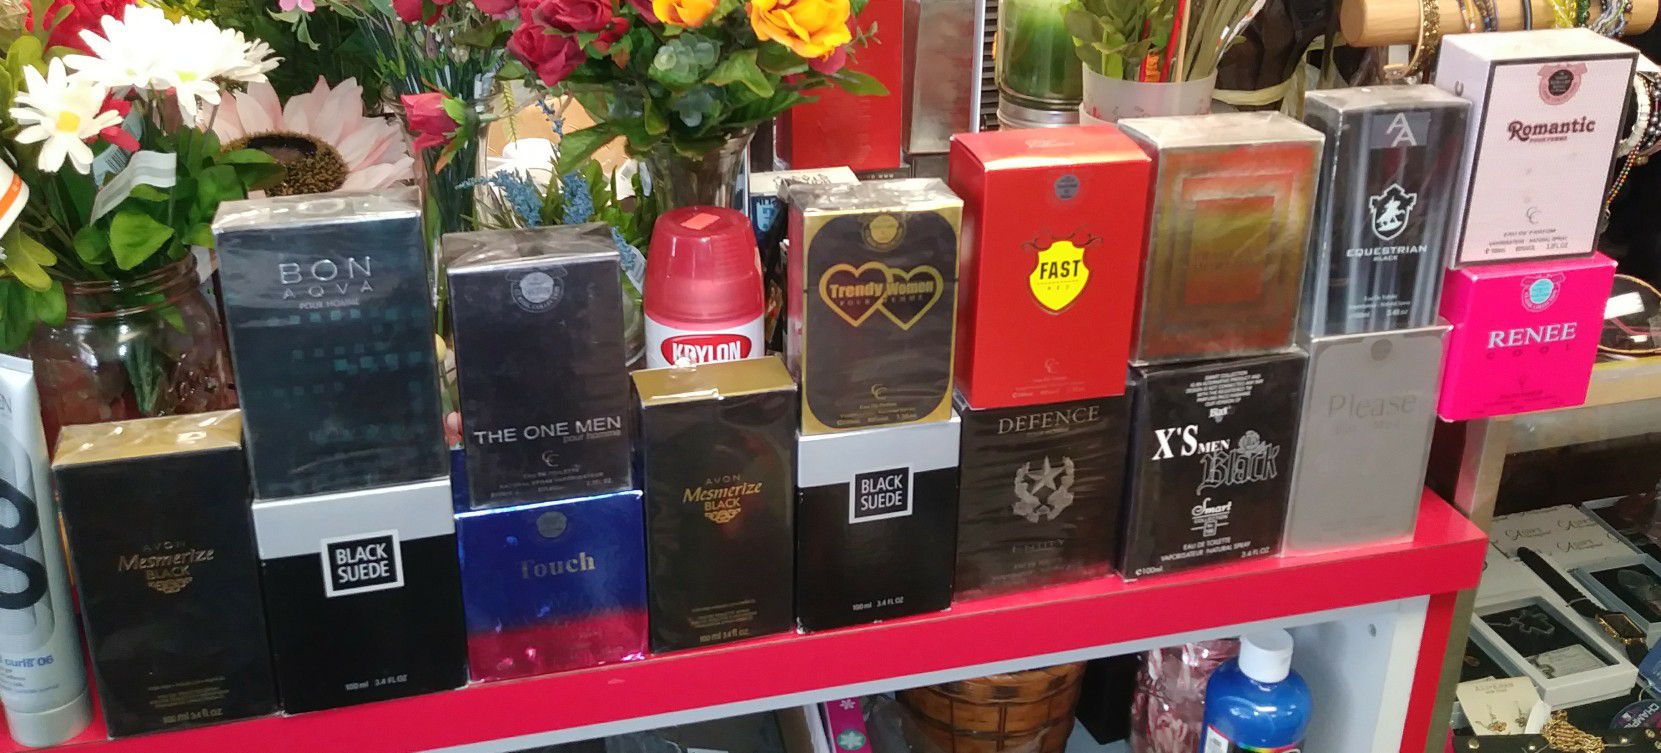 Perfumes and cologne